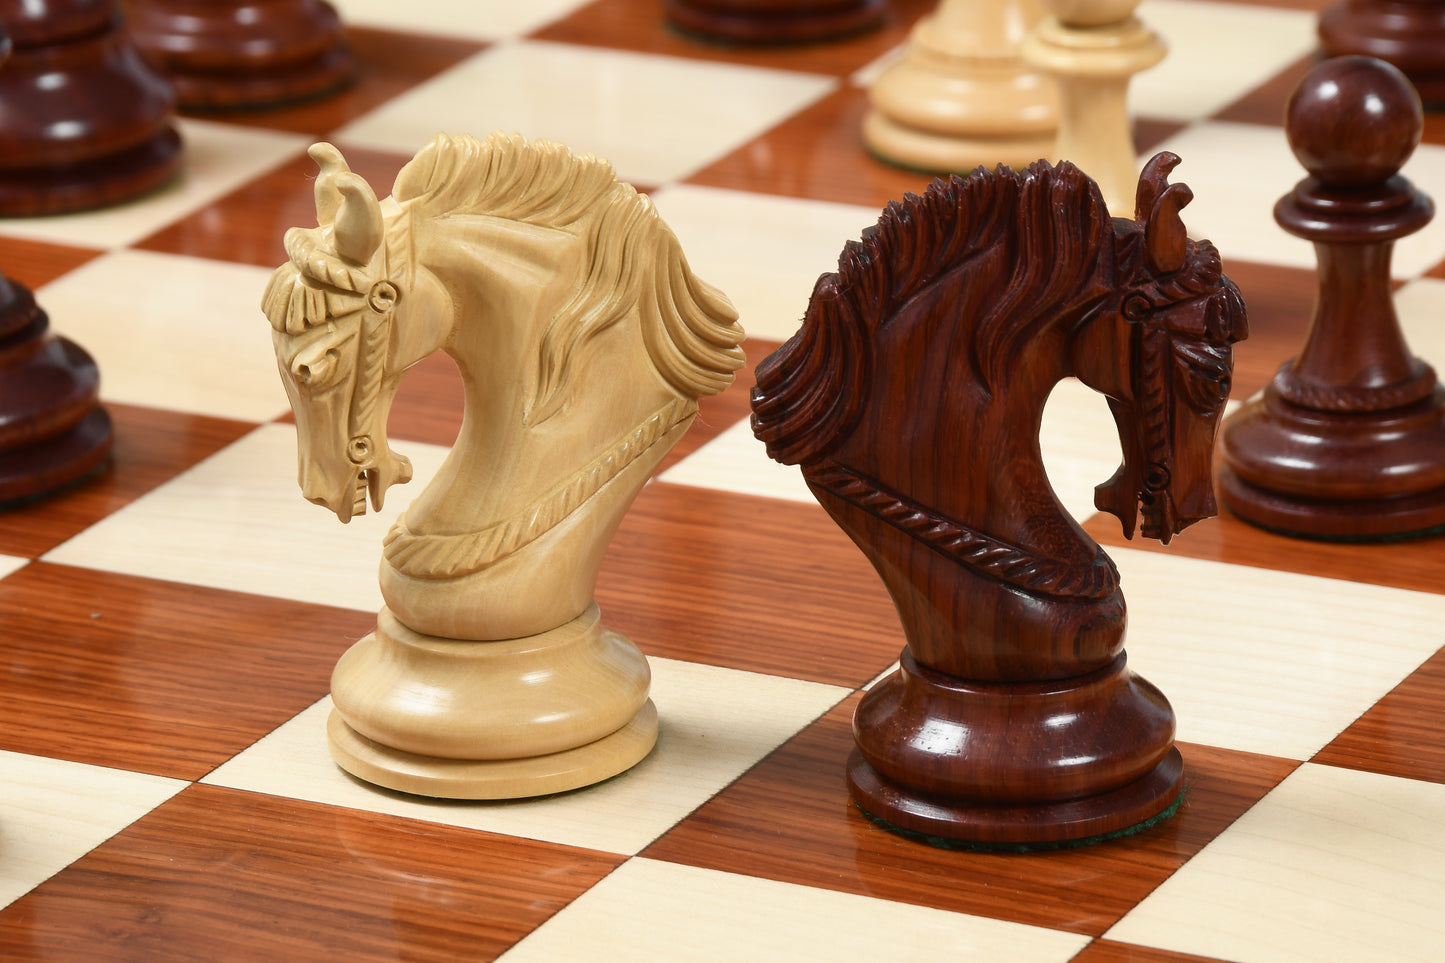 The Excalibur Luxury Artisan Series Chess Pieces in Bud Rosewood / Box Wood - 4.6" King